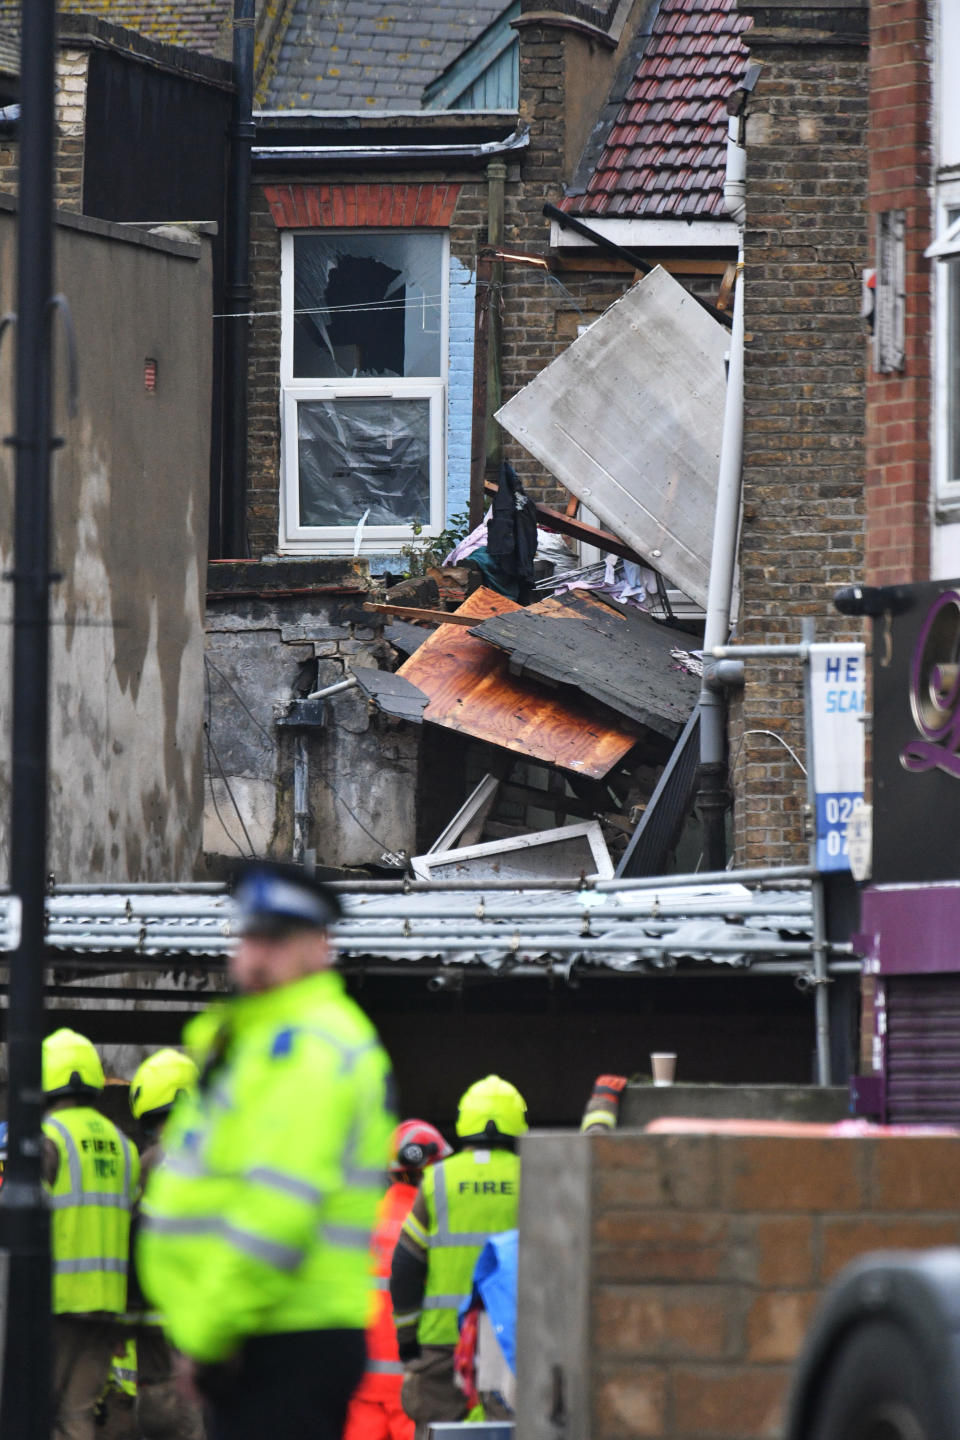 Emergency services at the scene of a suspected gas explosion on King Street in Ealing, west London. Rescuers are involved in a "complex" search for anyone who may still be inside the collapsed building.